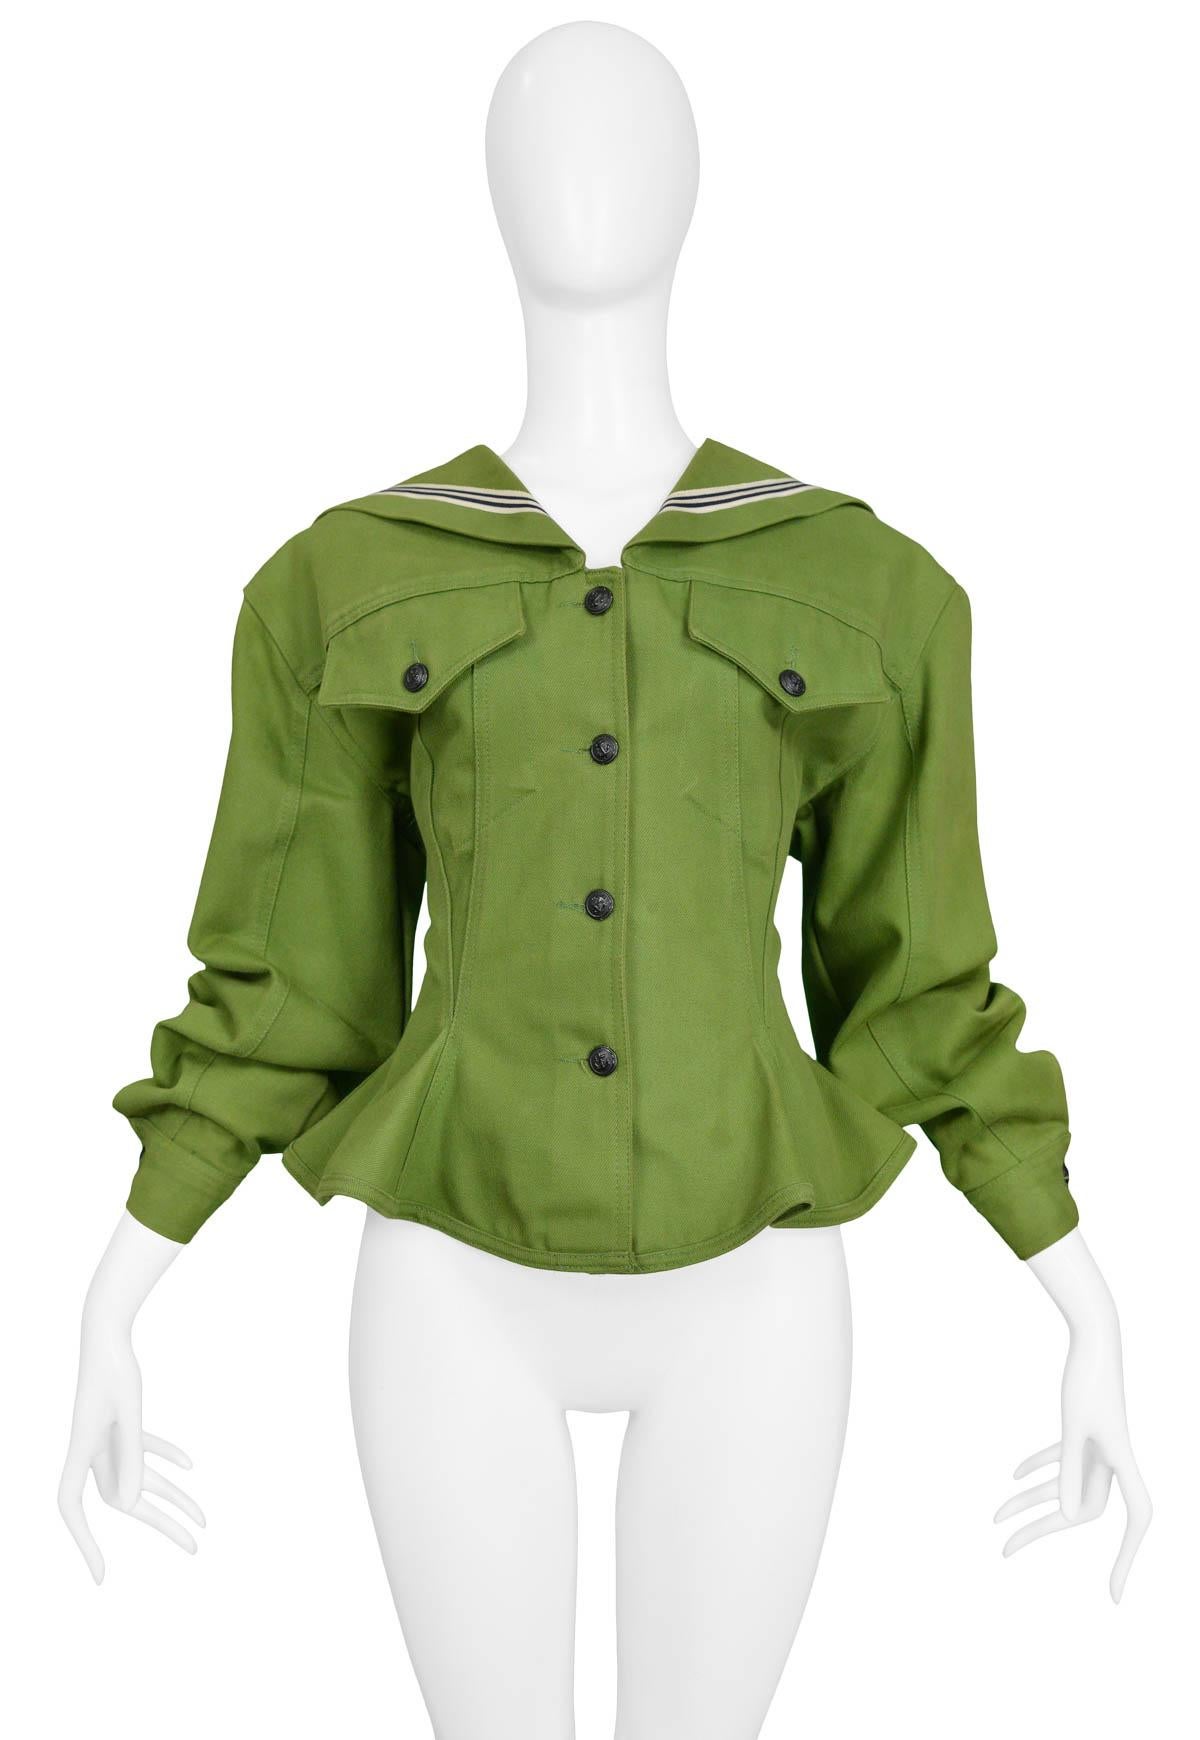 Vintage Jean Paul Gaultier olive green sailor jacket featuring a striped sailor style lapel, double lace up detailing up the the back and double pockets at the chest.


Excellent Vintage Condition.

Size Medium.